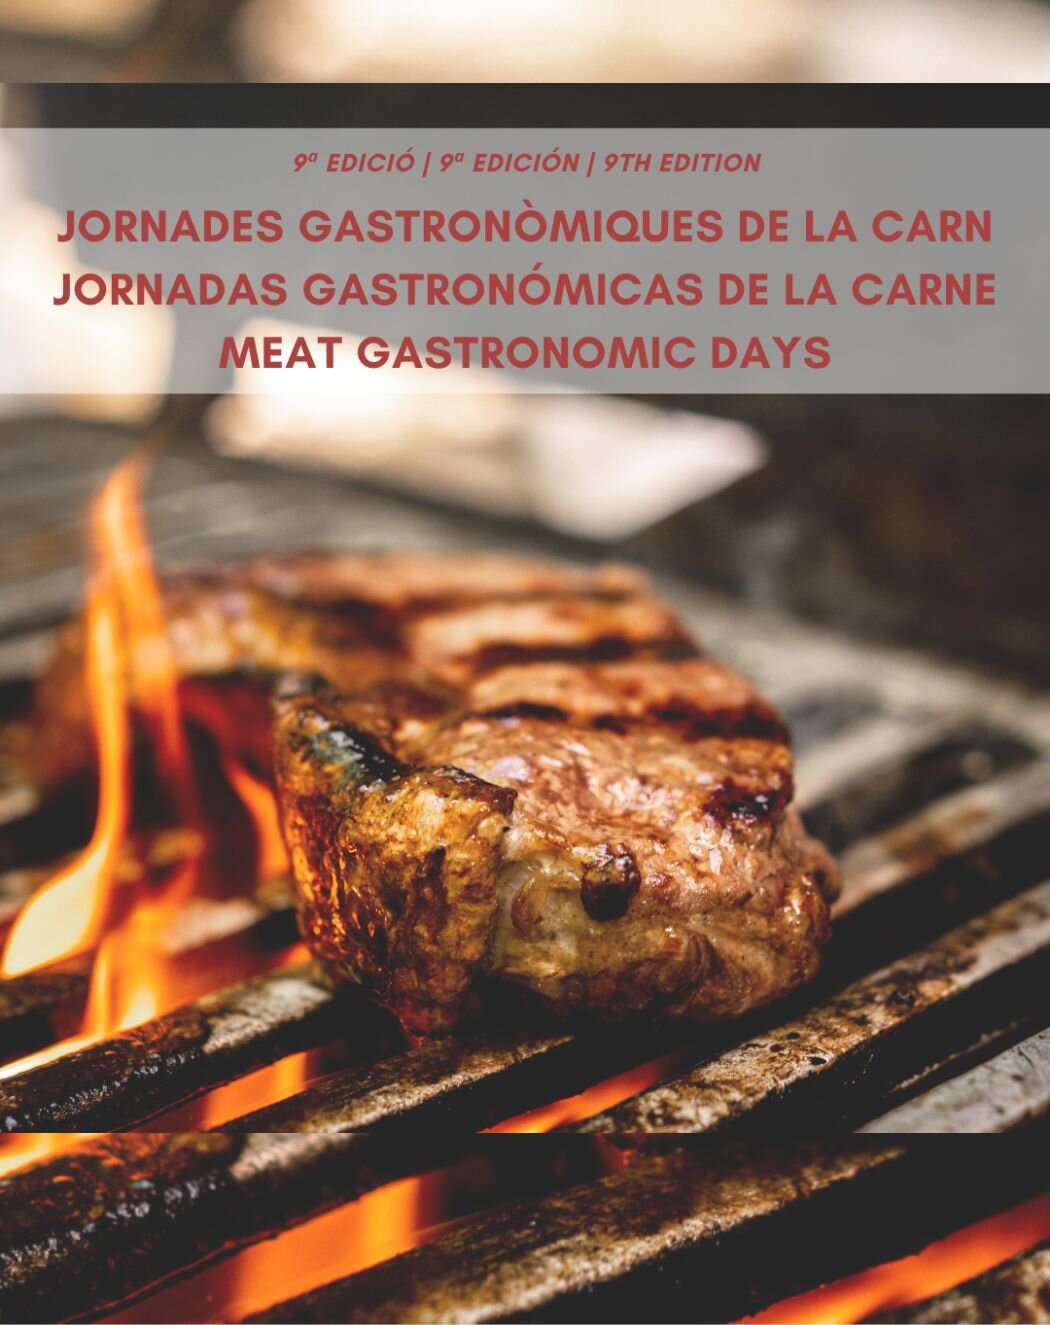 THE GASTRONOMIC MEAT DAYS ARE BACK!